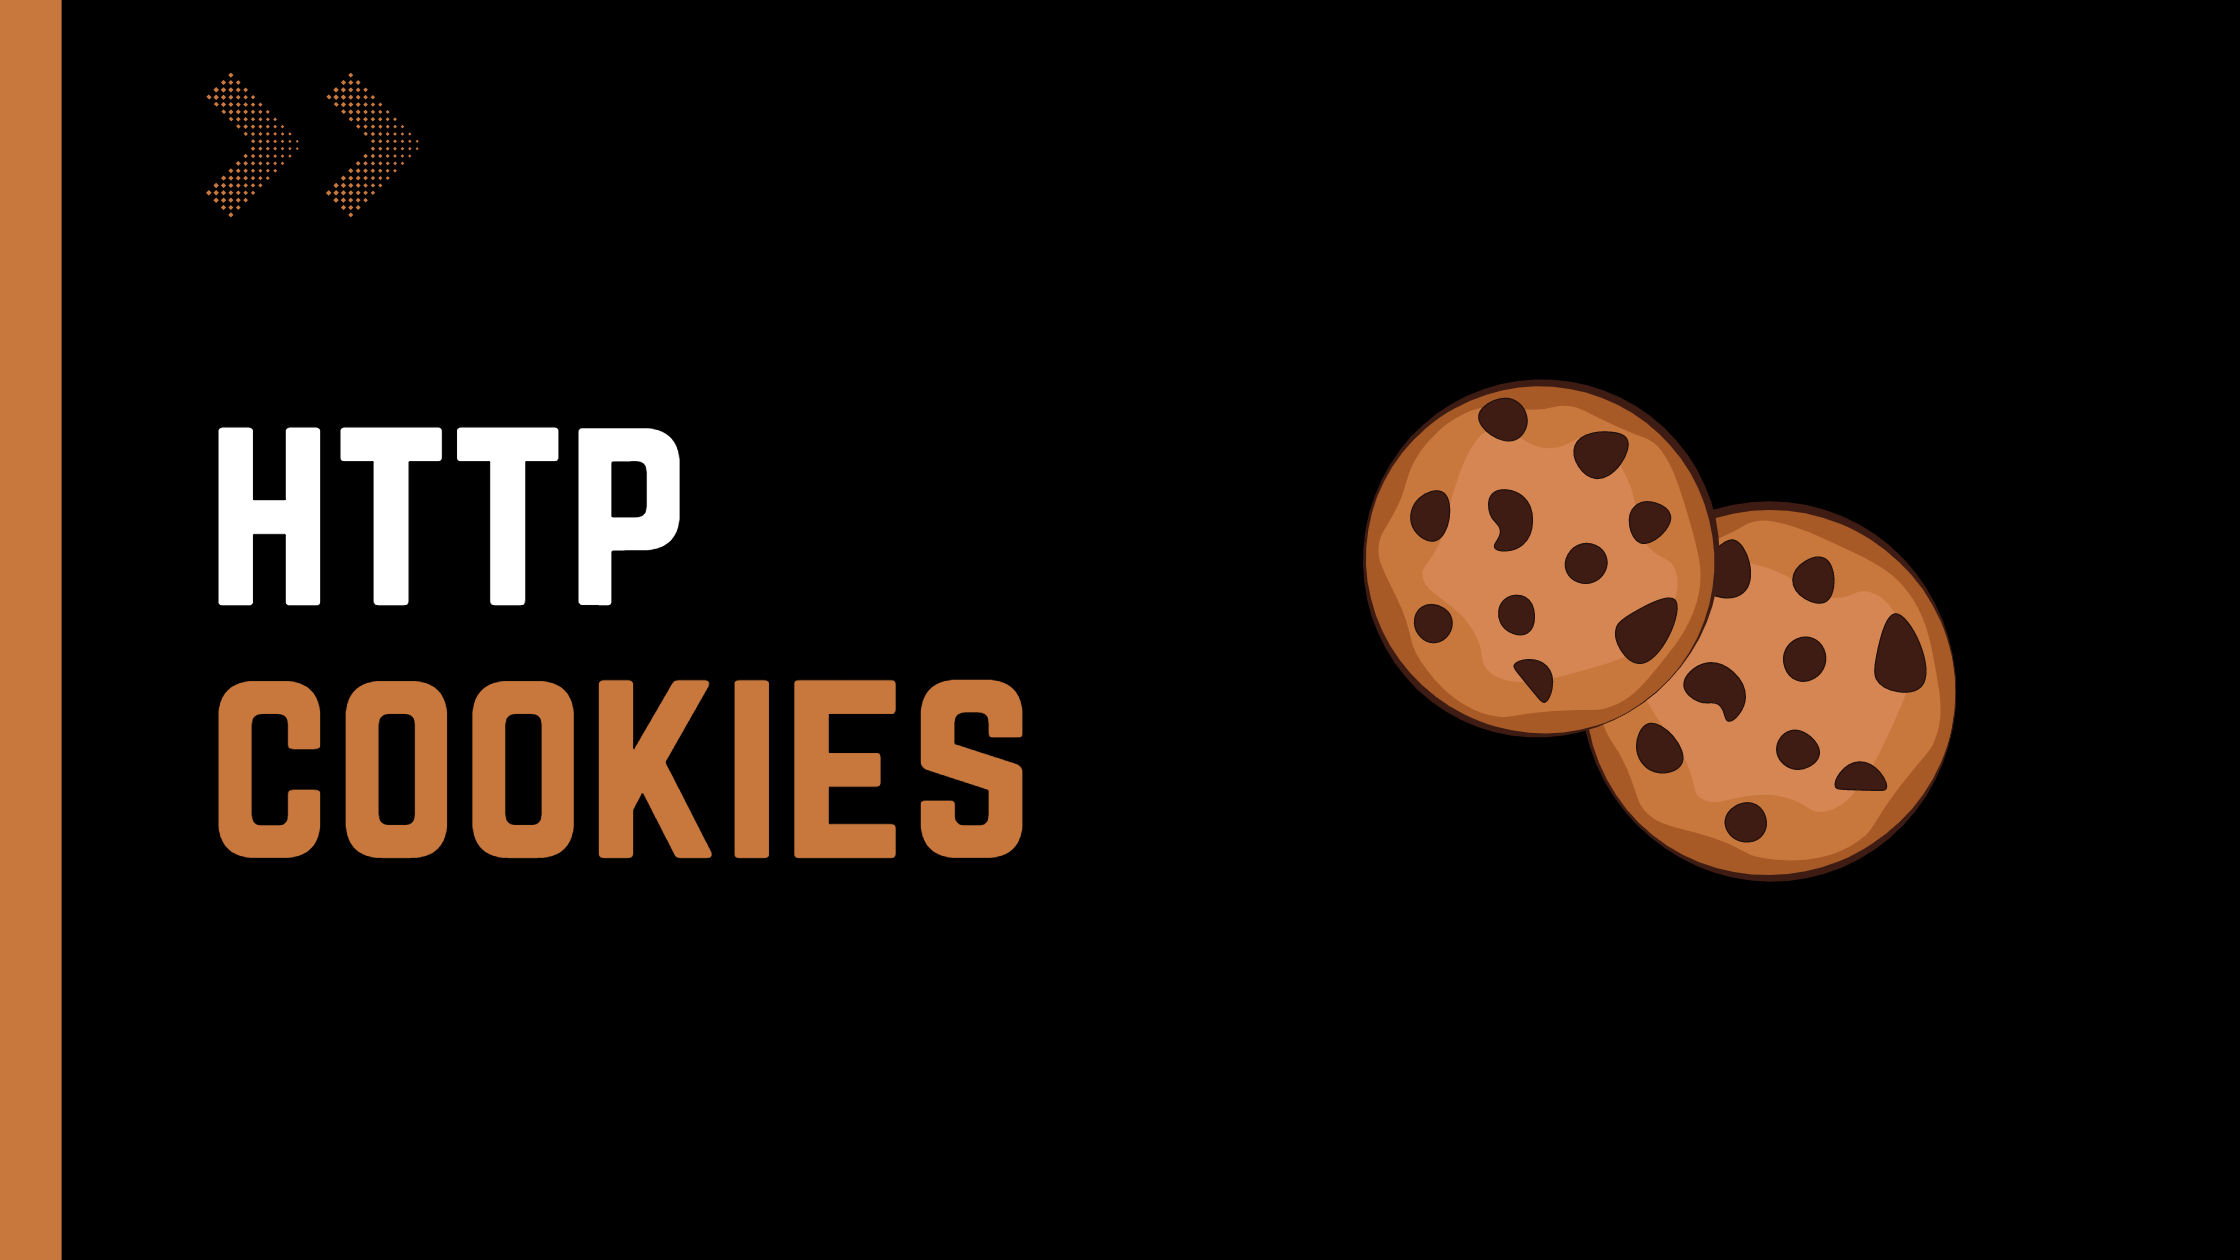 HTTP cookies are getting a bad rep